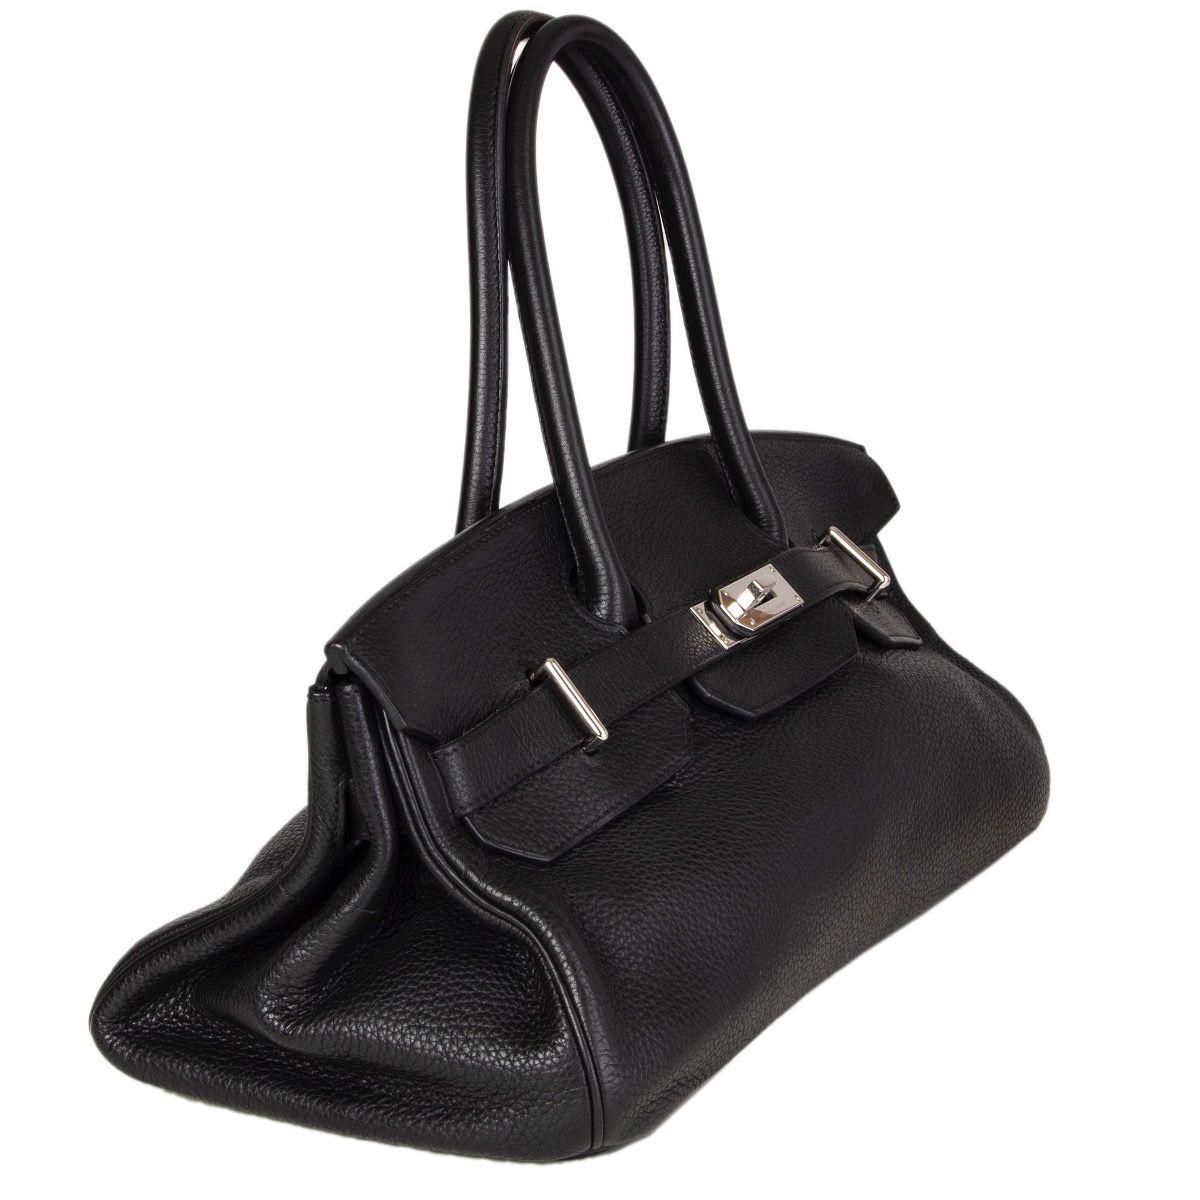 Hermes 'JPG I Shoulder Birkin' bag in black Taurillon Clemence leather with Palladium hardware. Lined in Chevre (goat skin). Has been carried and is in excellent condition. Comes with keys, lock and clochette.

Height 17cm (6.6in)
Width 43cm